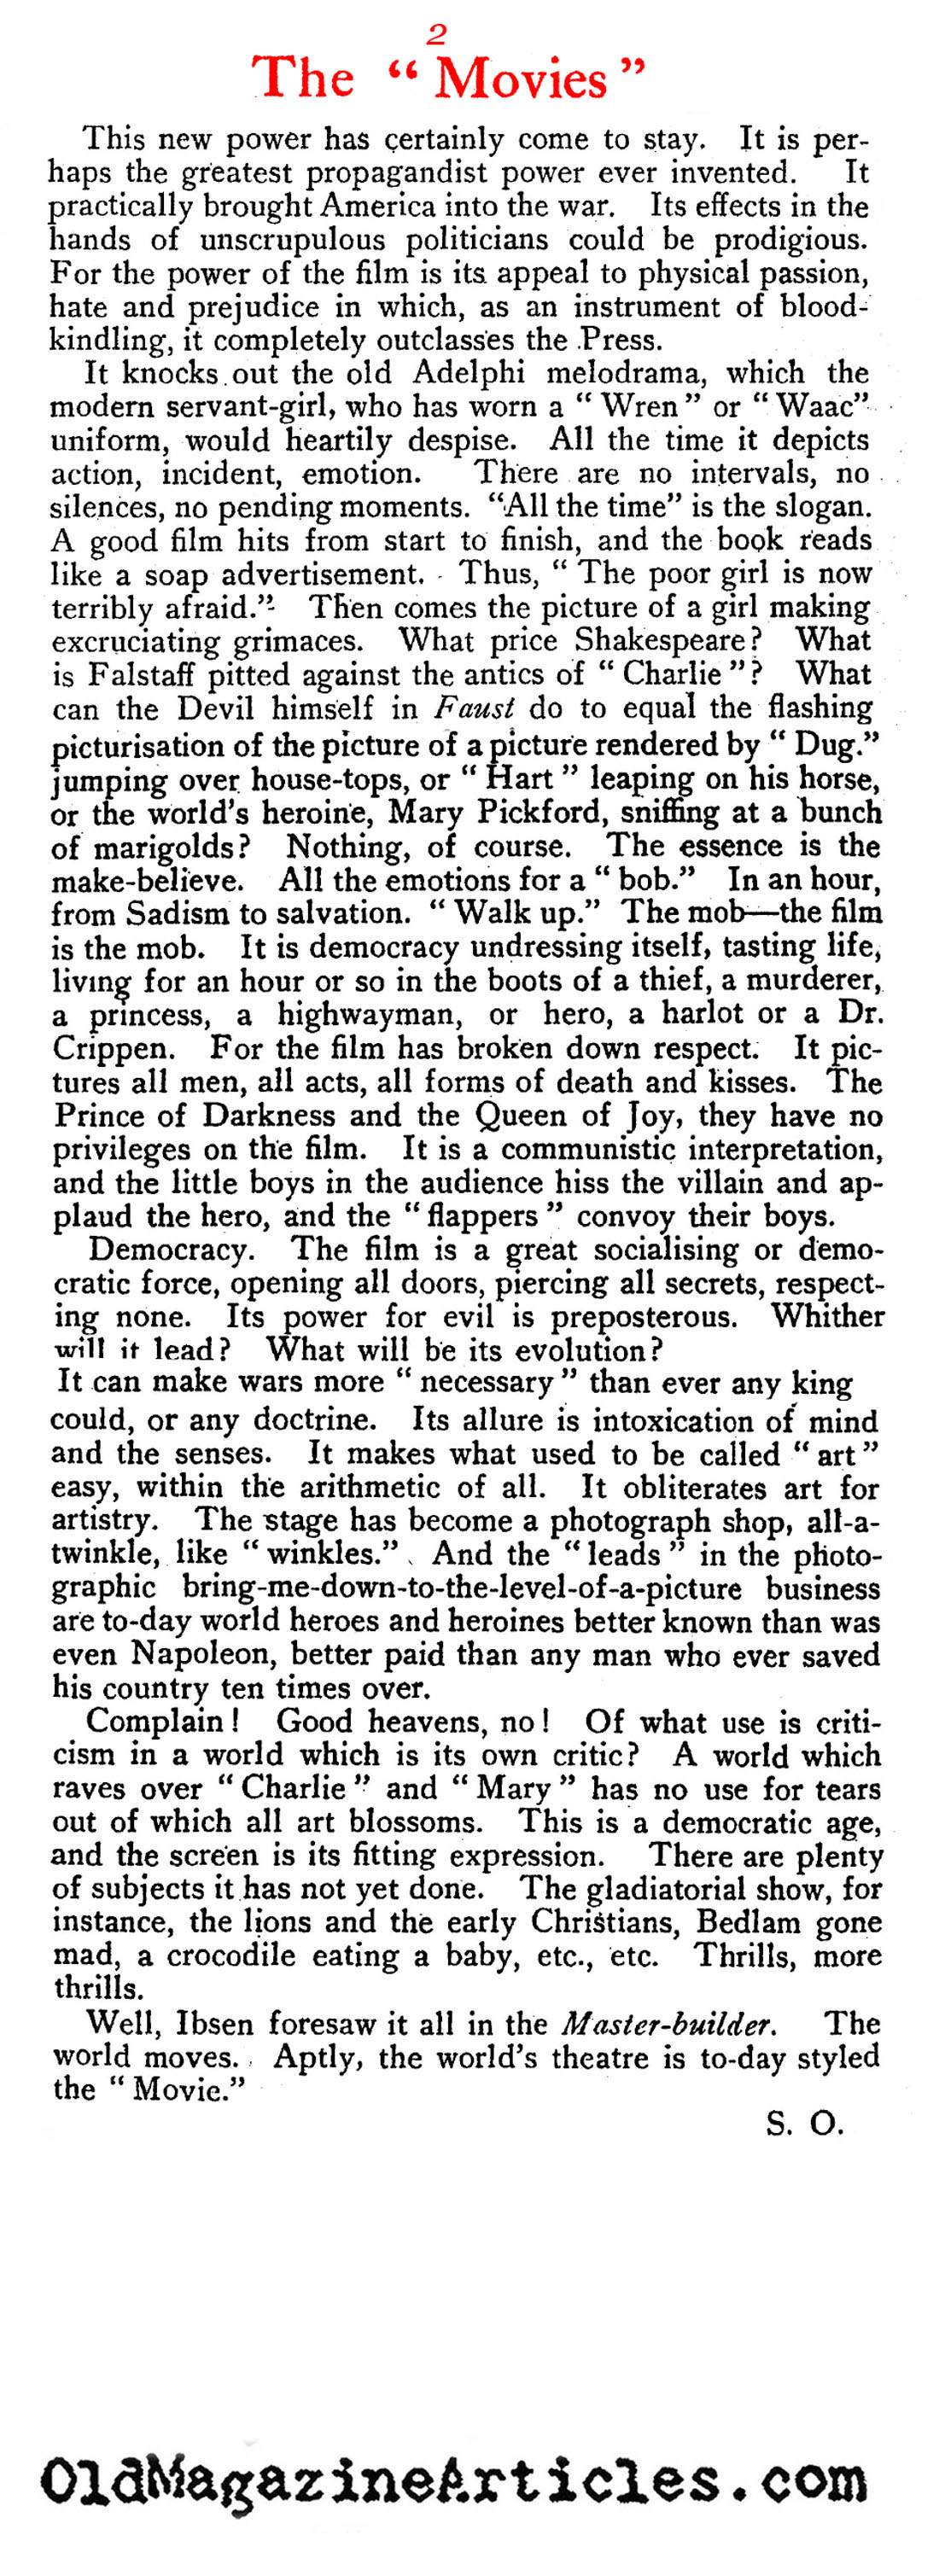 More Nasty Criticism About Silent Films (English Review, 1922)